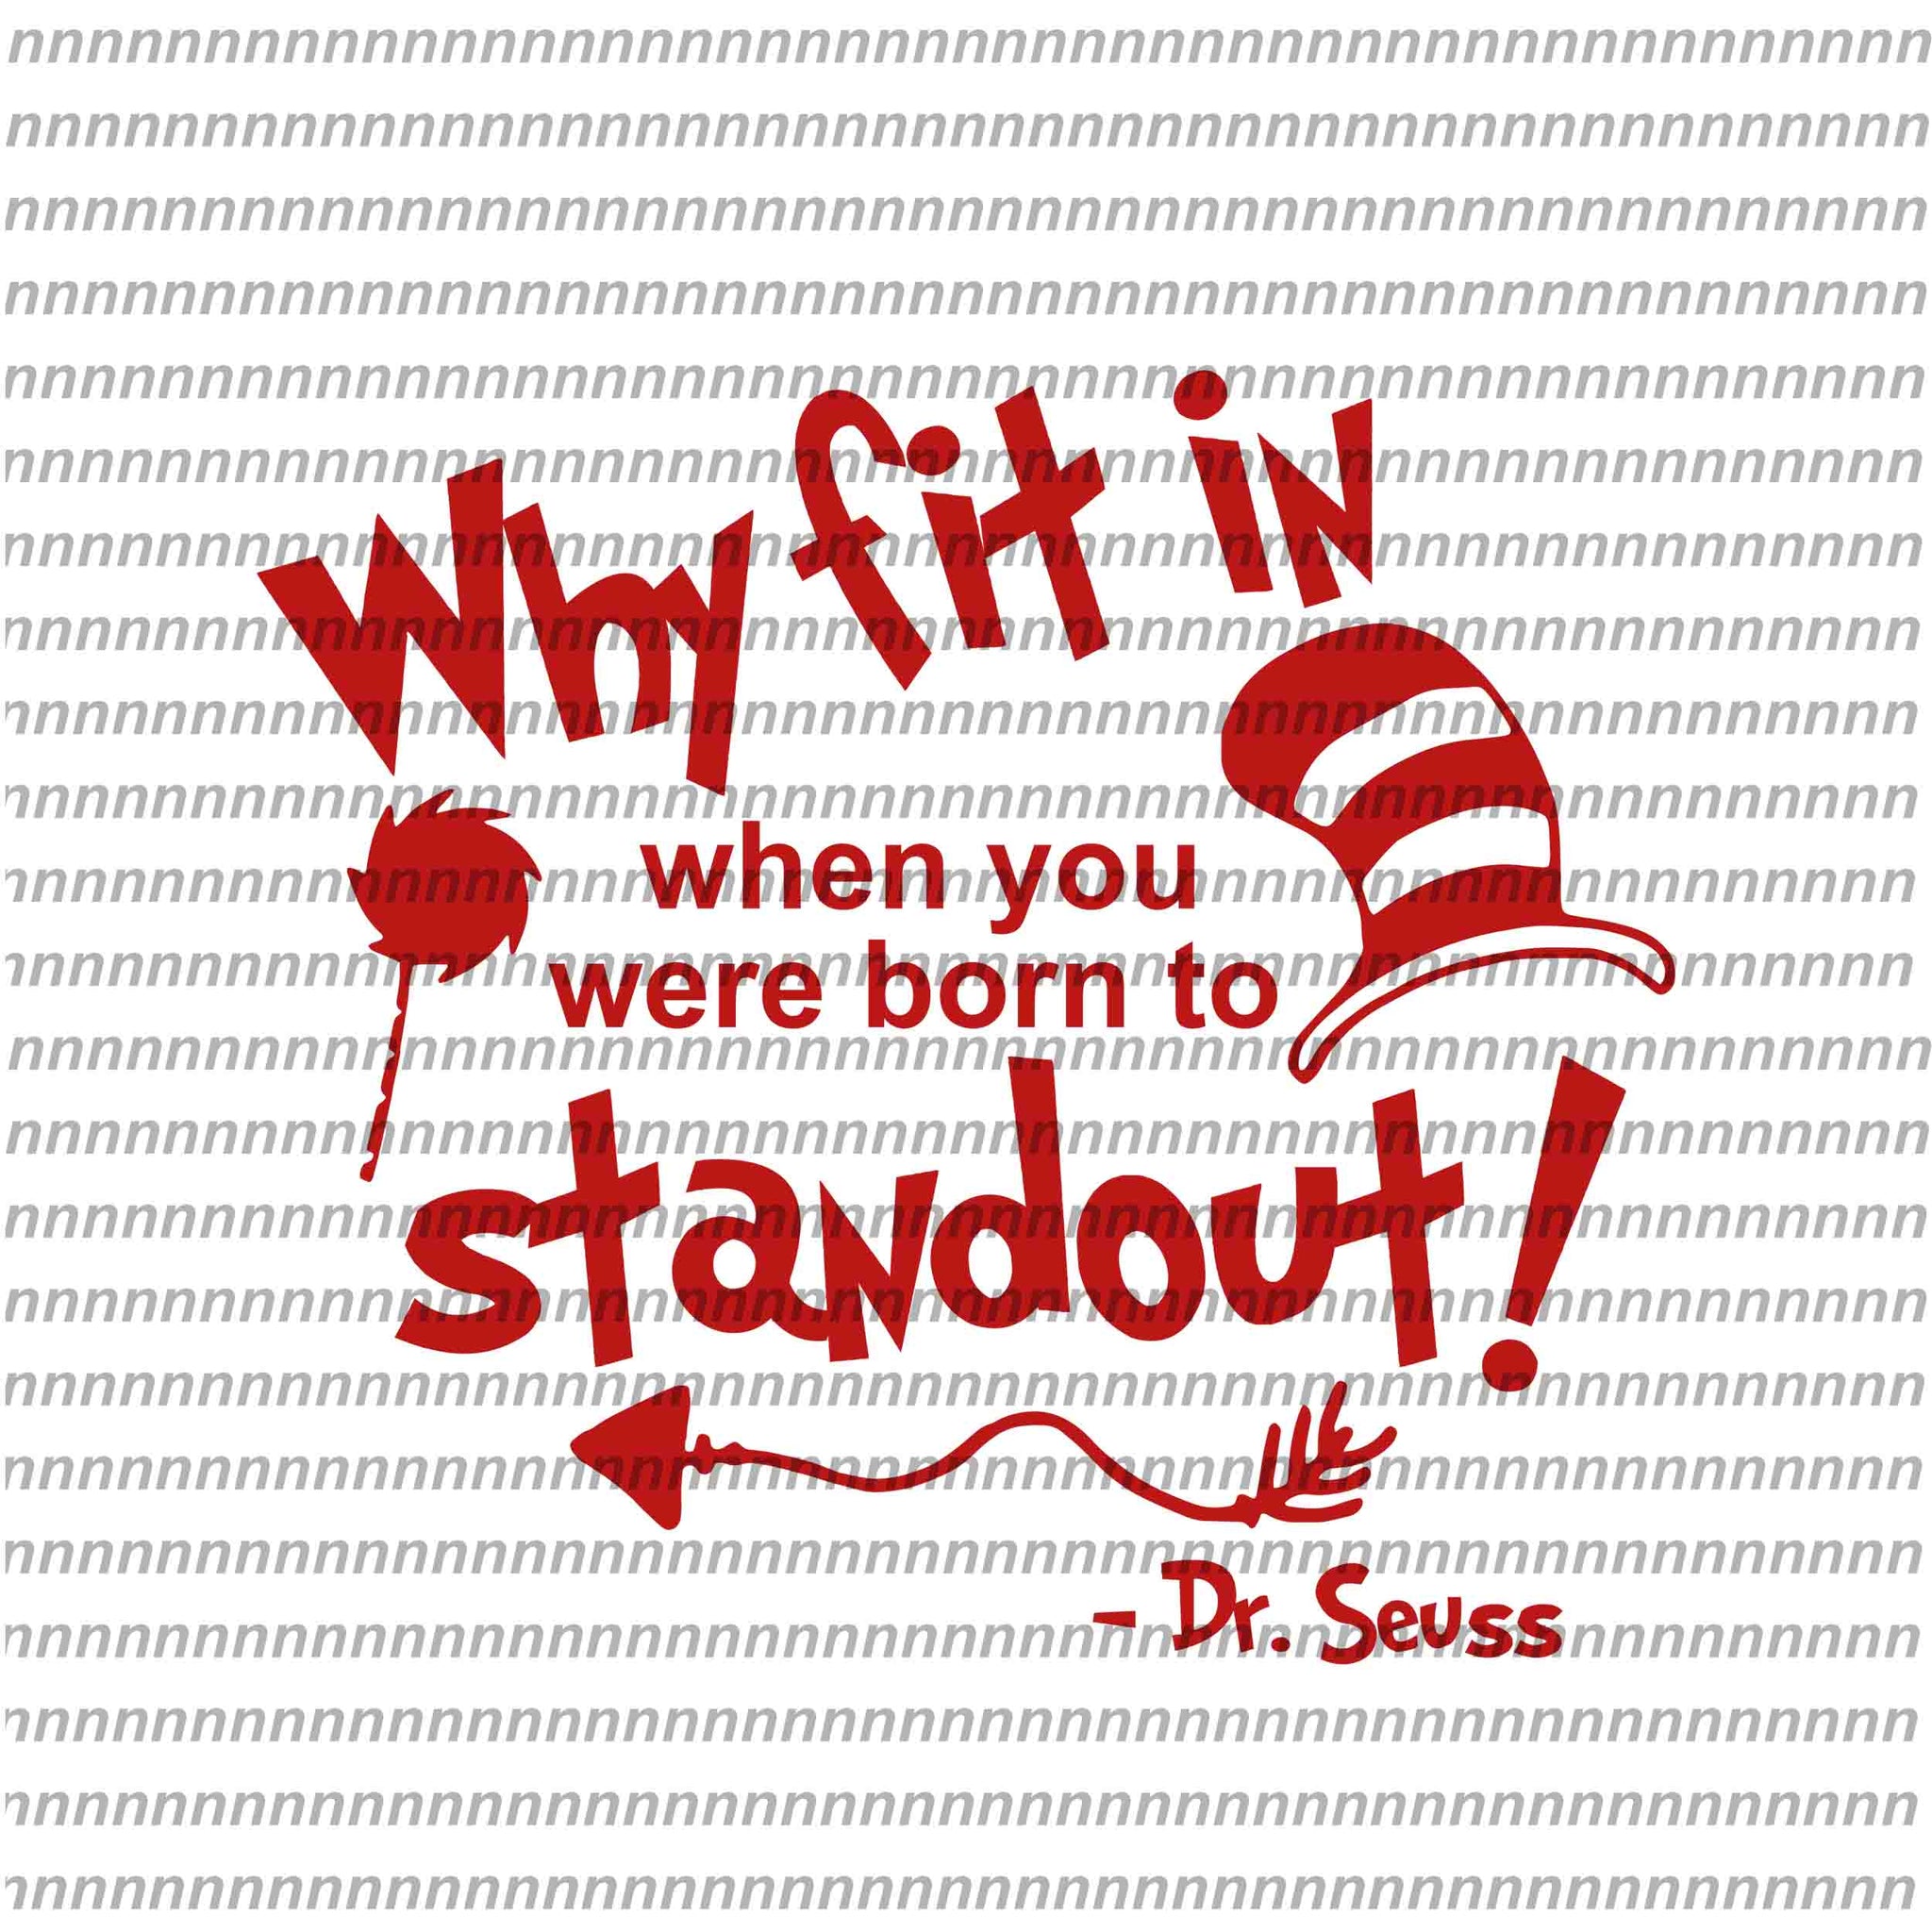 Why fin in when you were born to stand out, dr seuss svg, dr seuss vector, dr seuss quote, dr seuss design, Cat in the hat svg, thing 1 thing 2 thing 3, svg, png, dxf, eps file